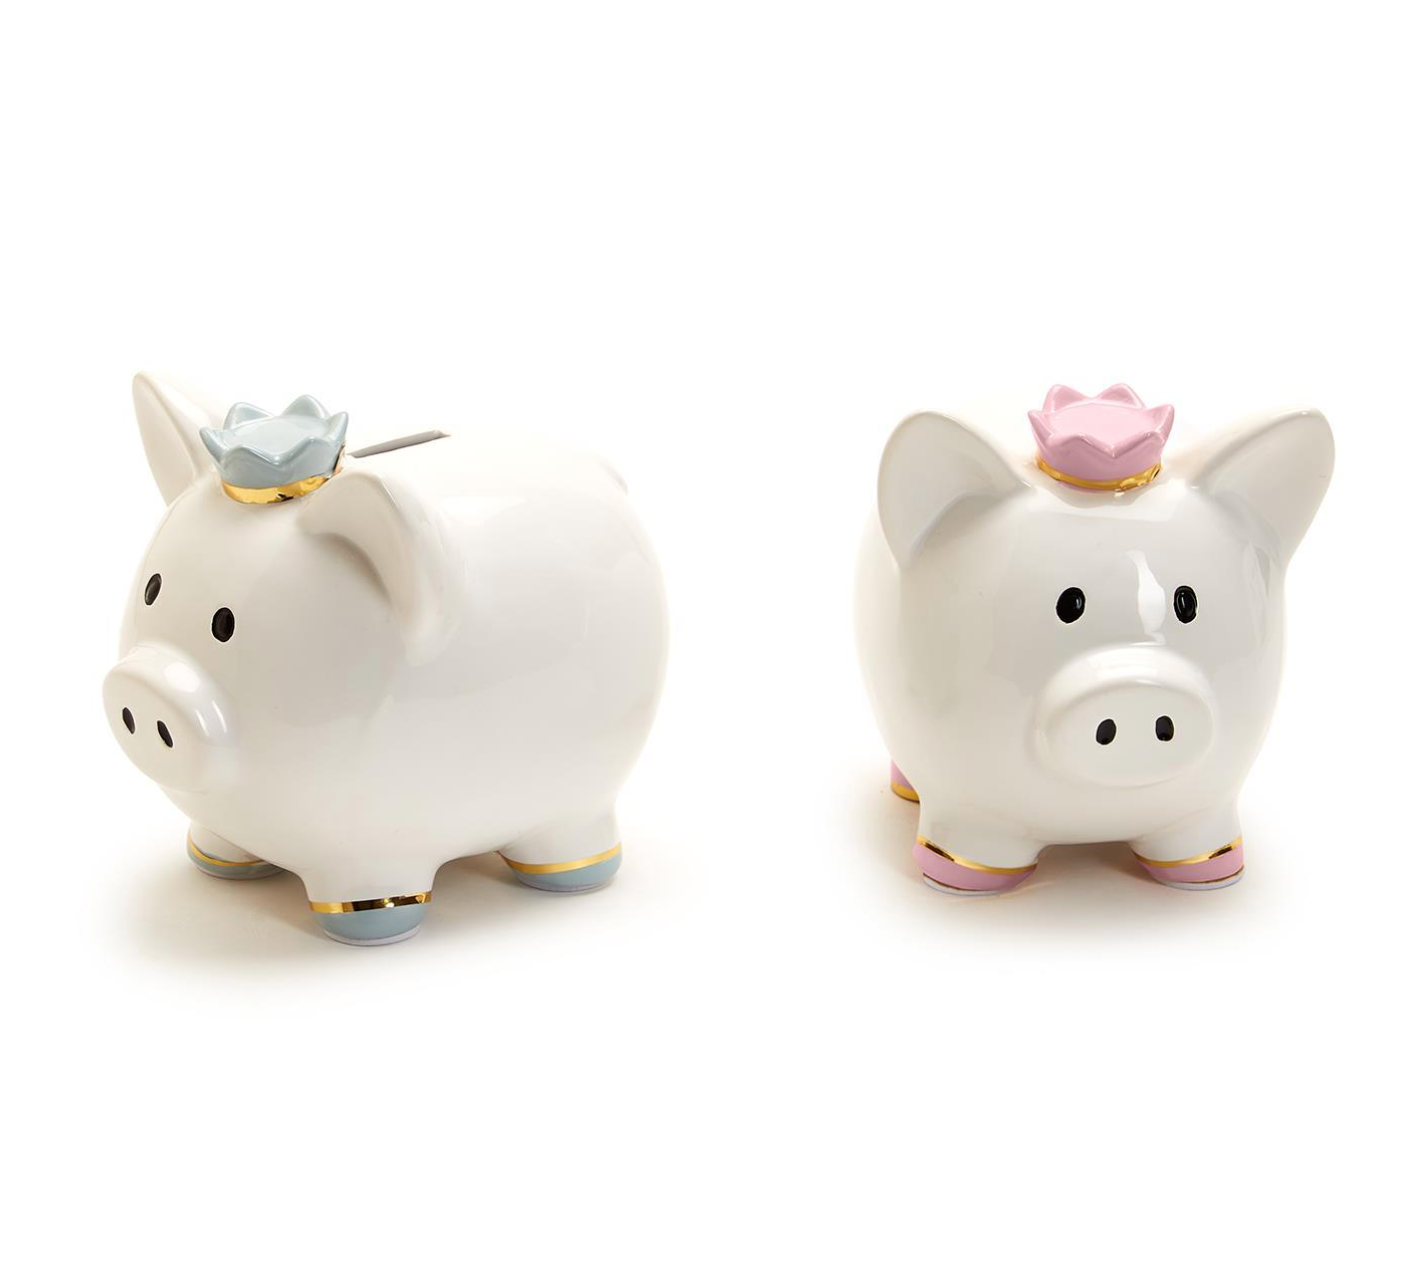 Piggy Bank with Crown